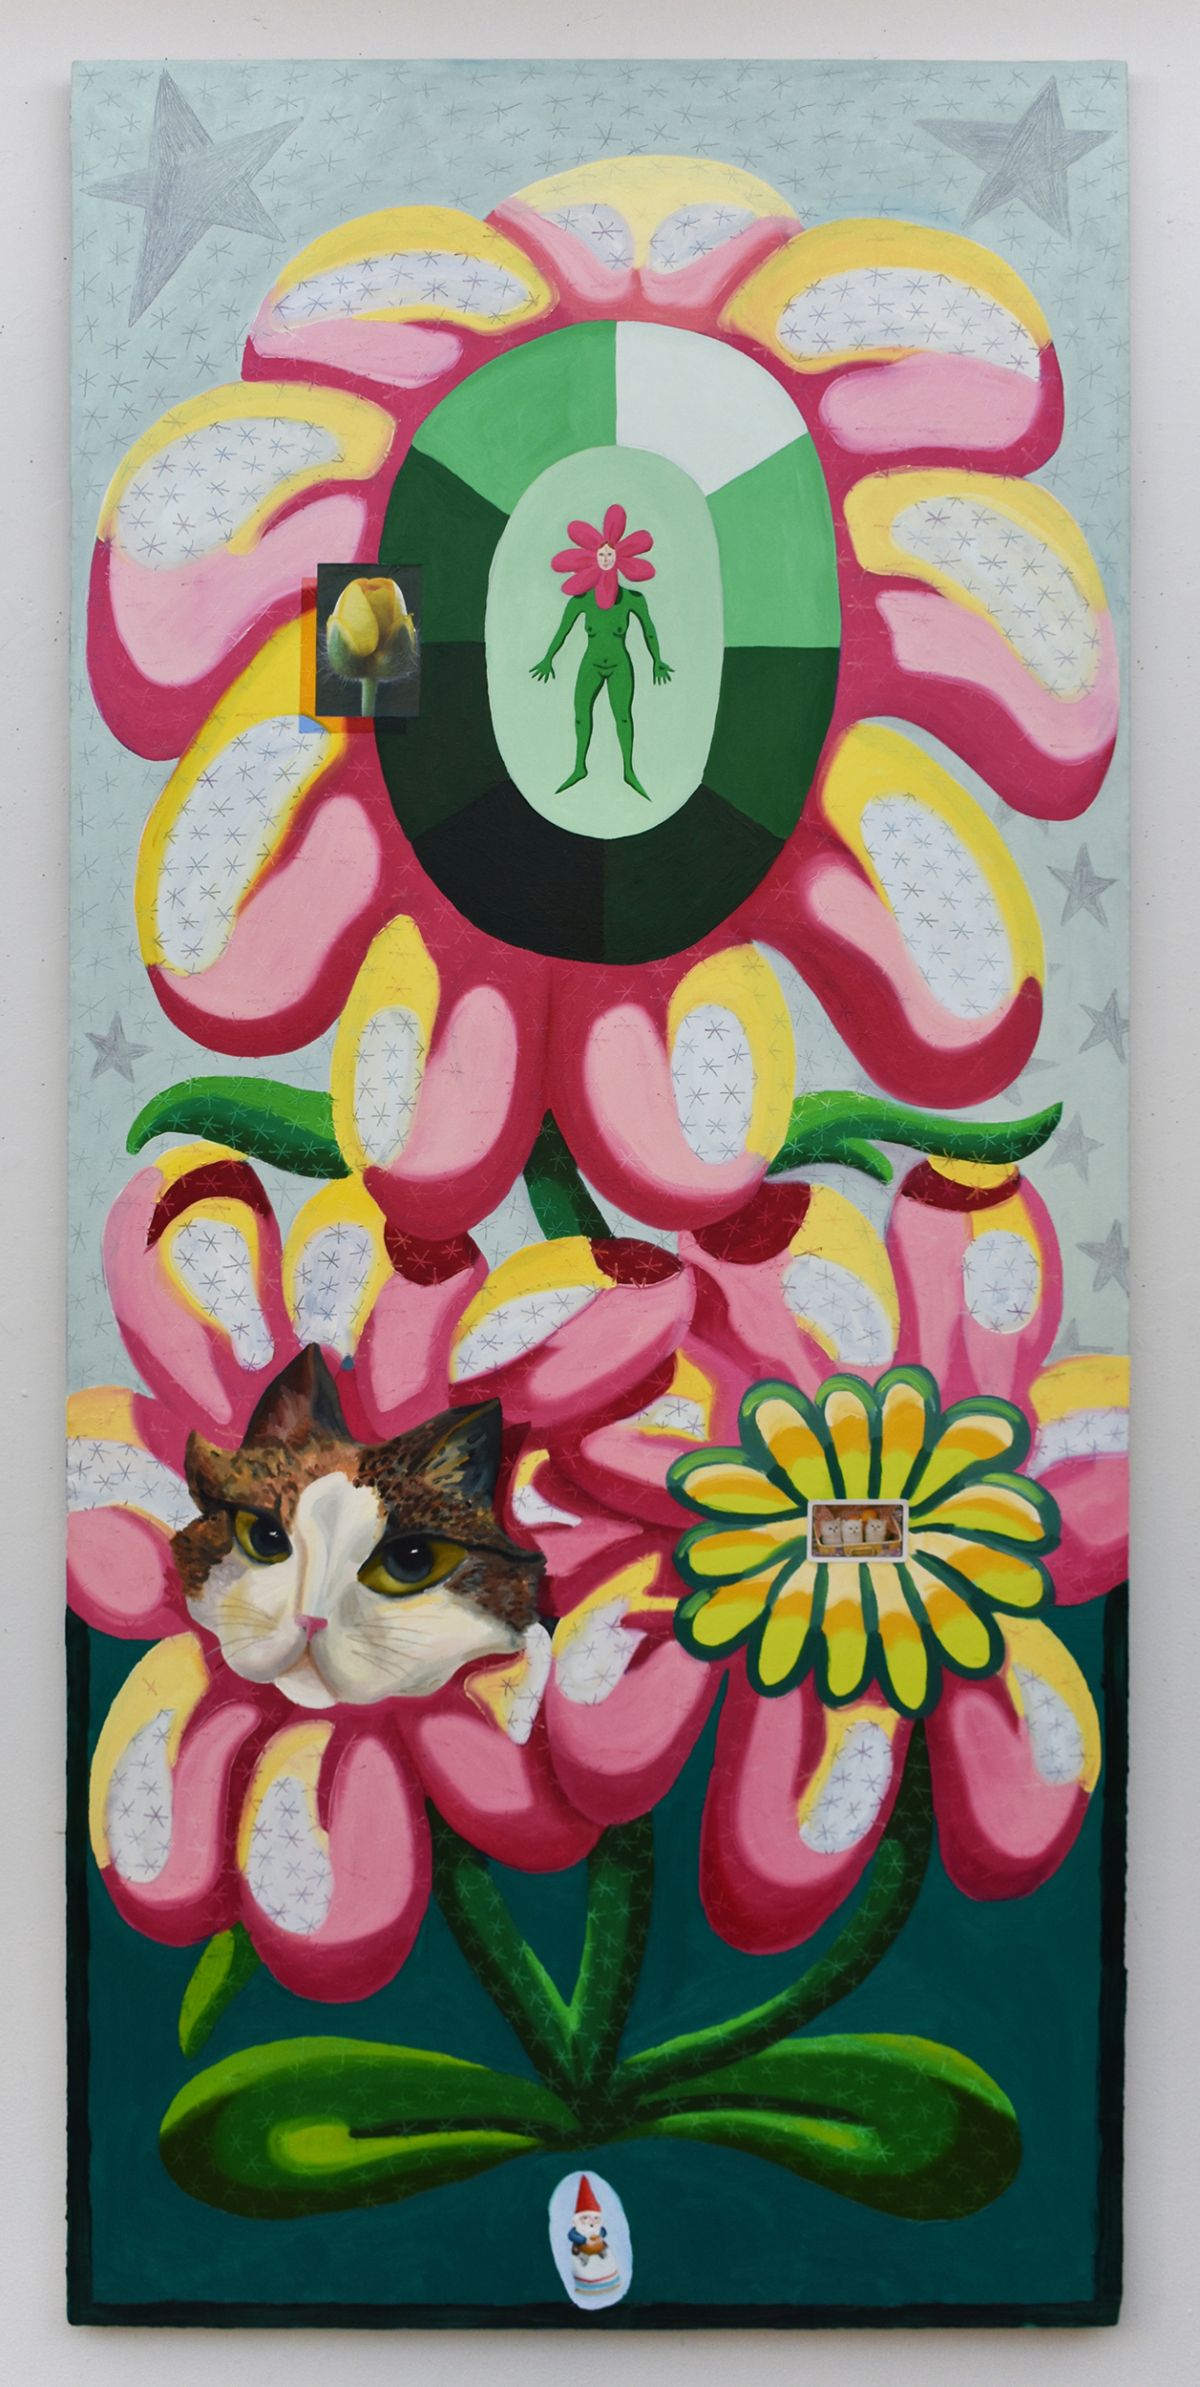 Lily Nickel, Gnome's Garden, Oil on canvas, 80 x 36, 2021